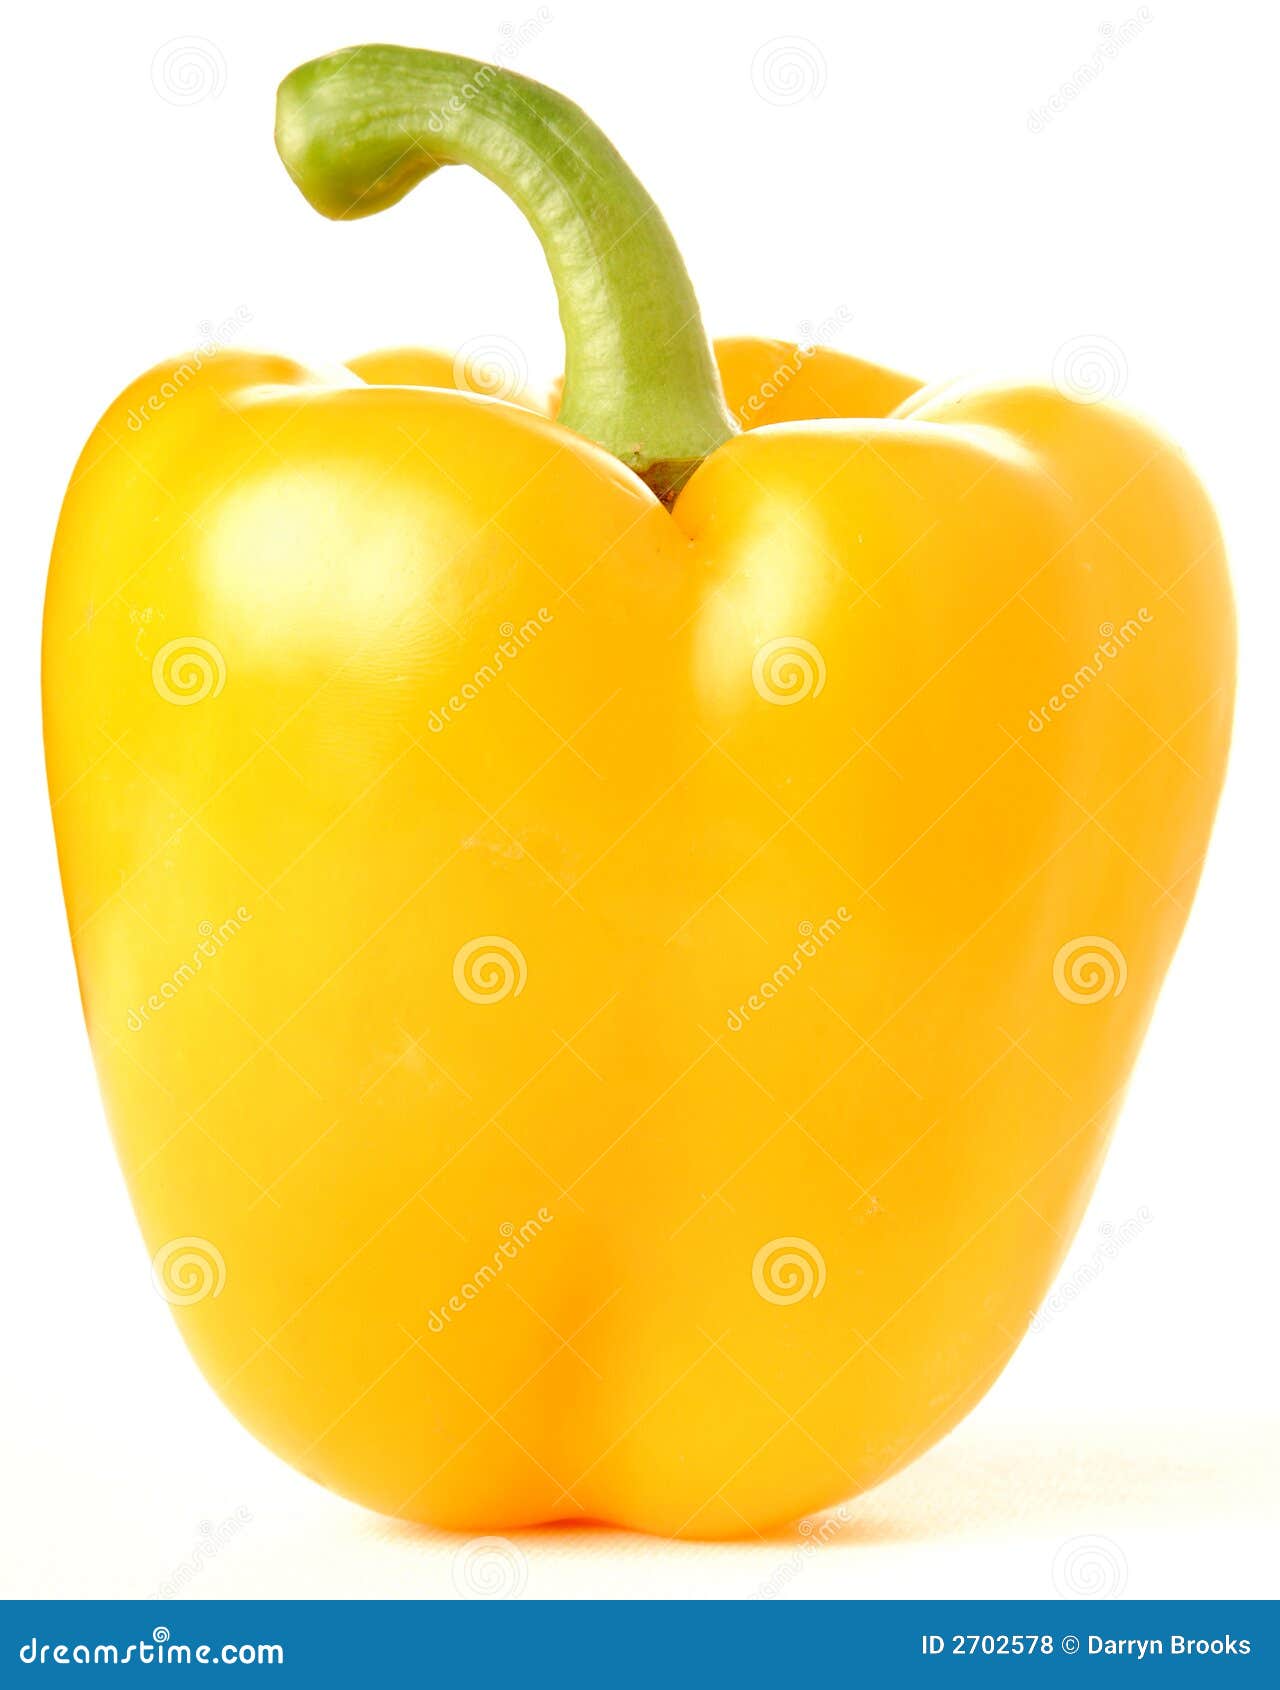 yellow pepper clipart - photo #30